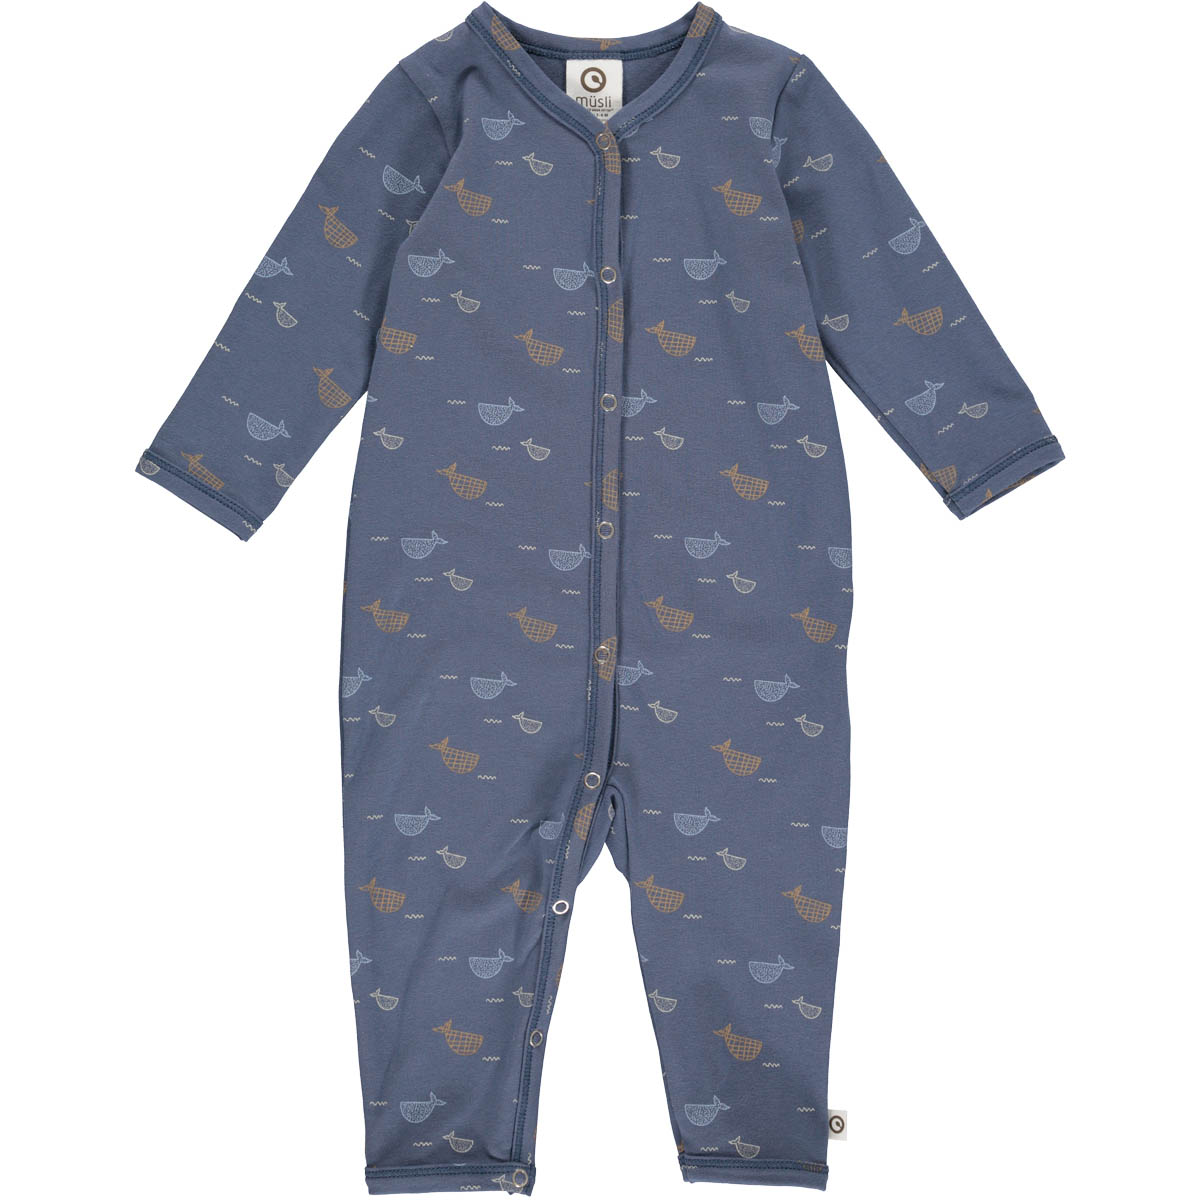 MAMA.LICIOUS Baby one-piece suit - 1584059100